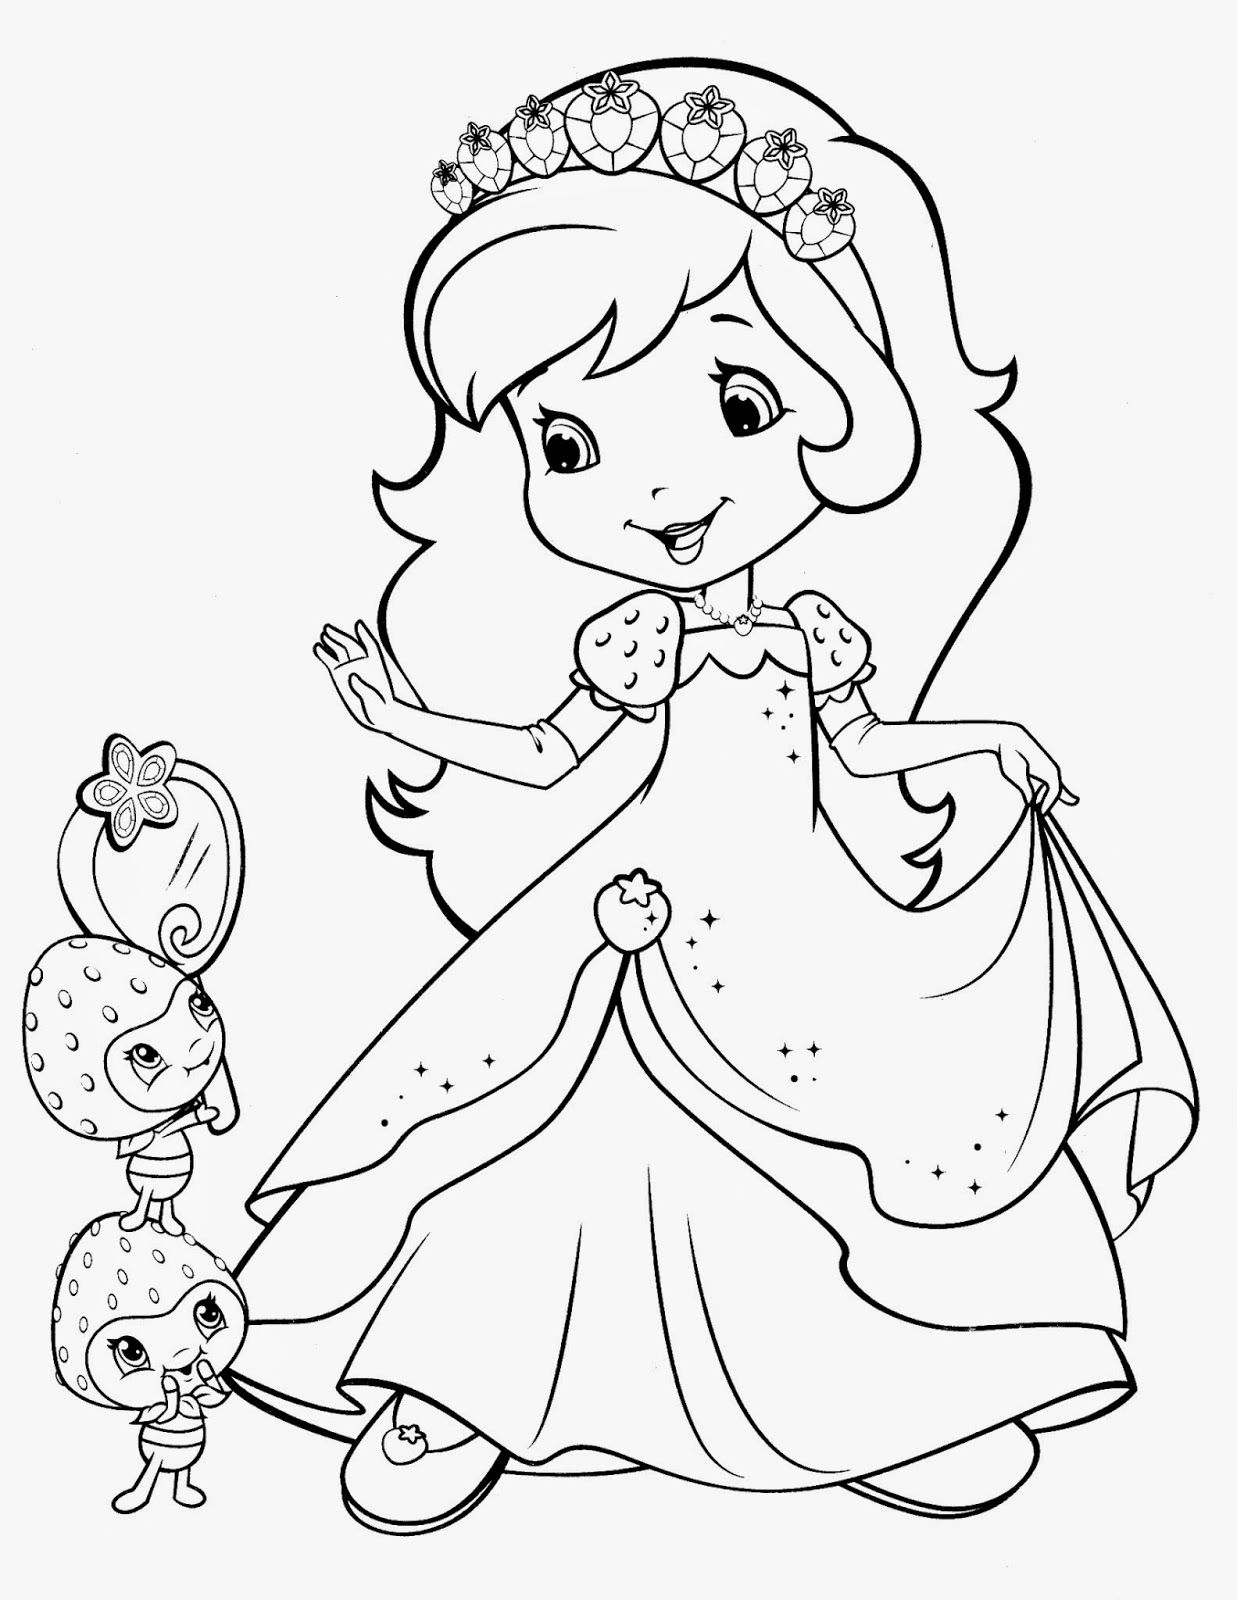 strawberry shortcake colouring pages to print printable coloring pages strawberry shortcake coloring pages pages print colouring to shortcake strawberry 